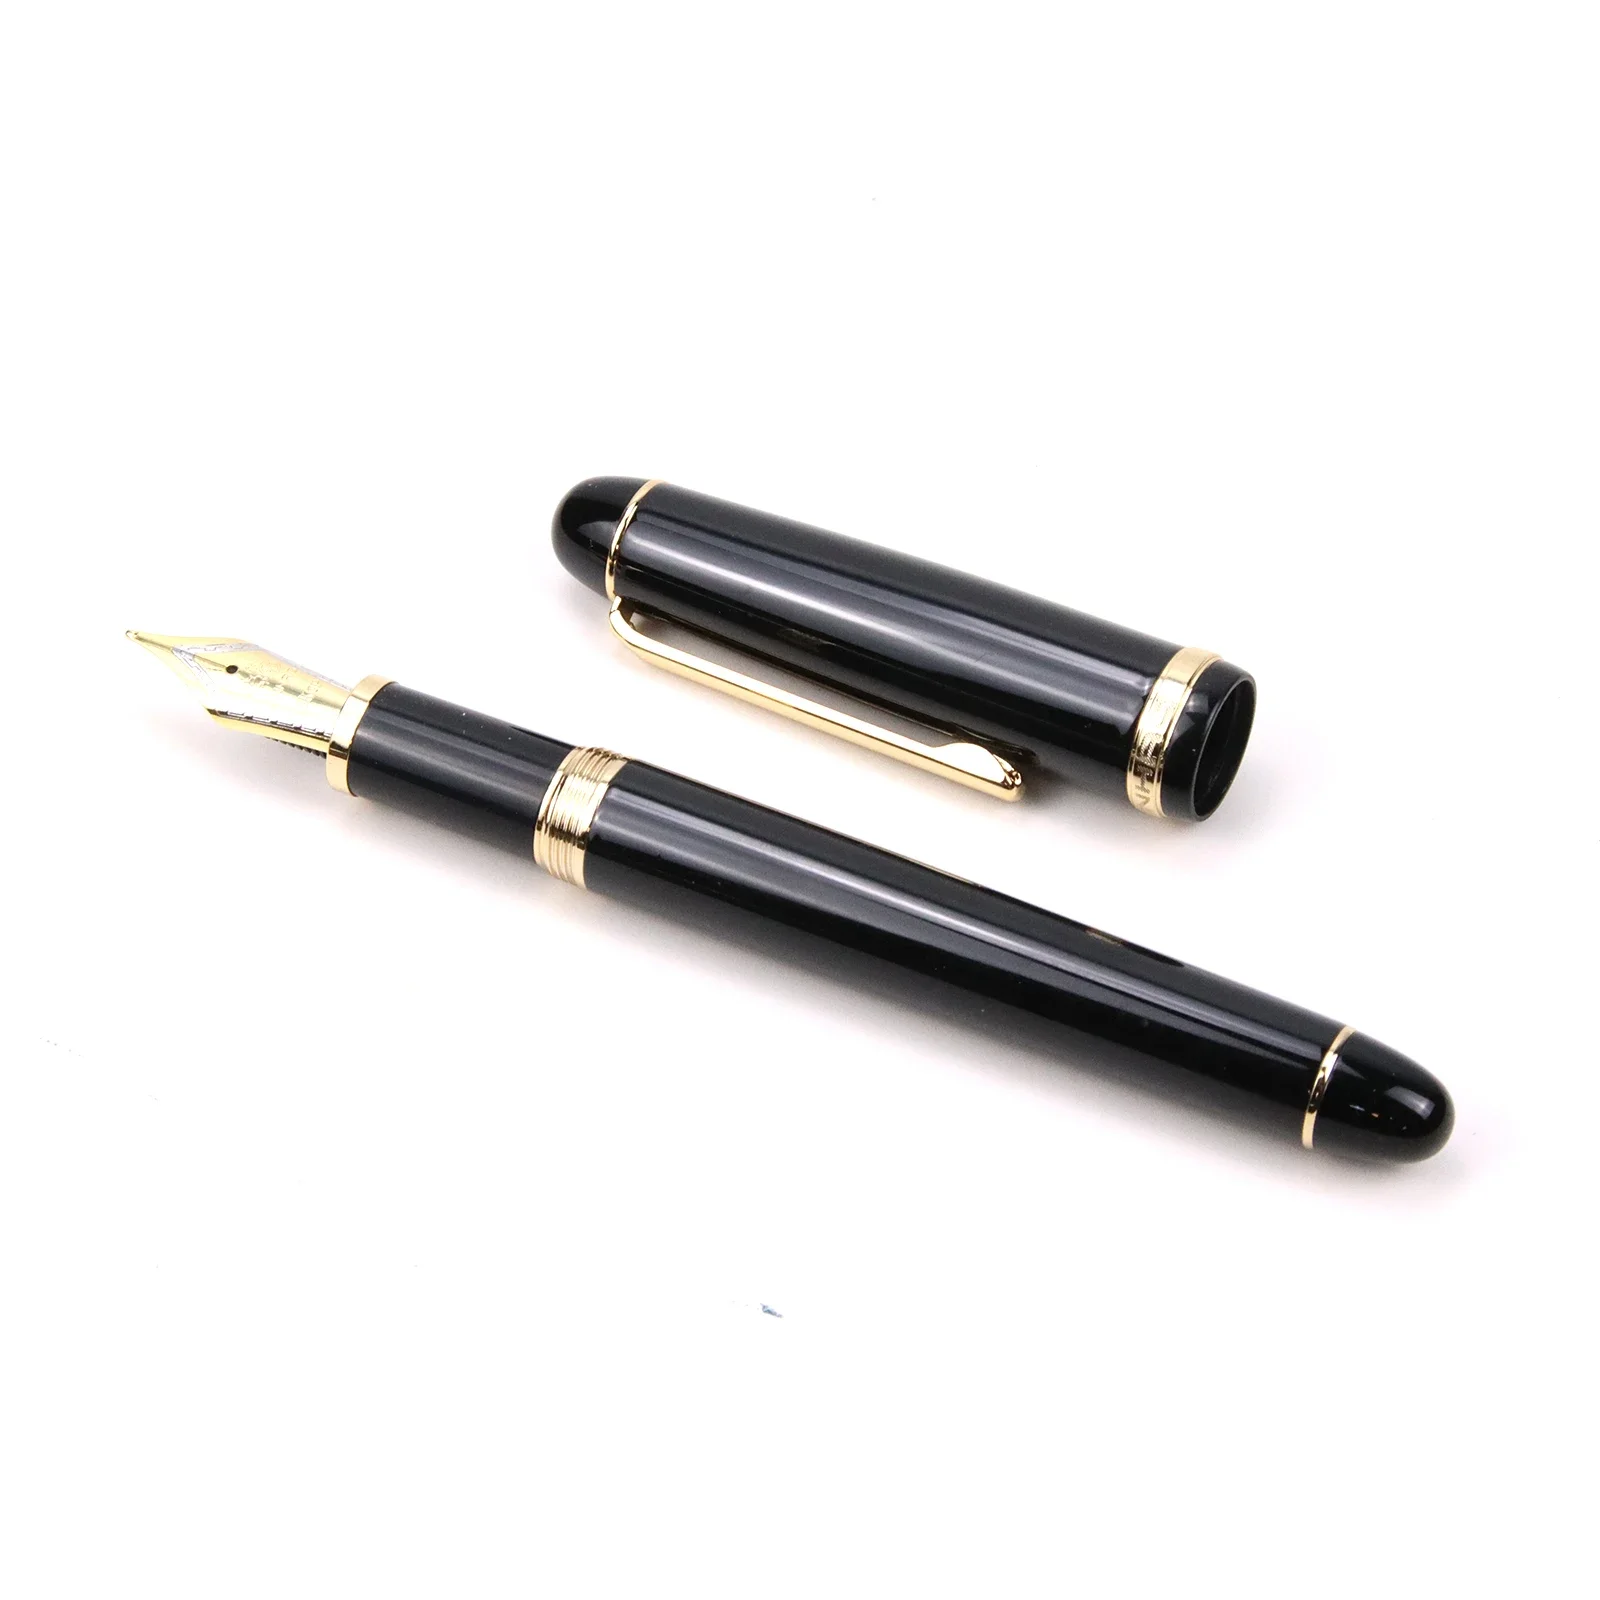 Jinhao X350 fountain pen metal M nibs Business Office School Stationery Supplies Fine Nib writing Pens gifts for friend black